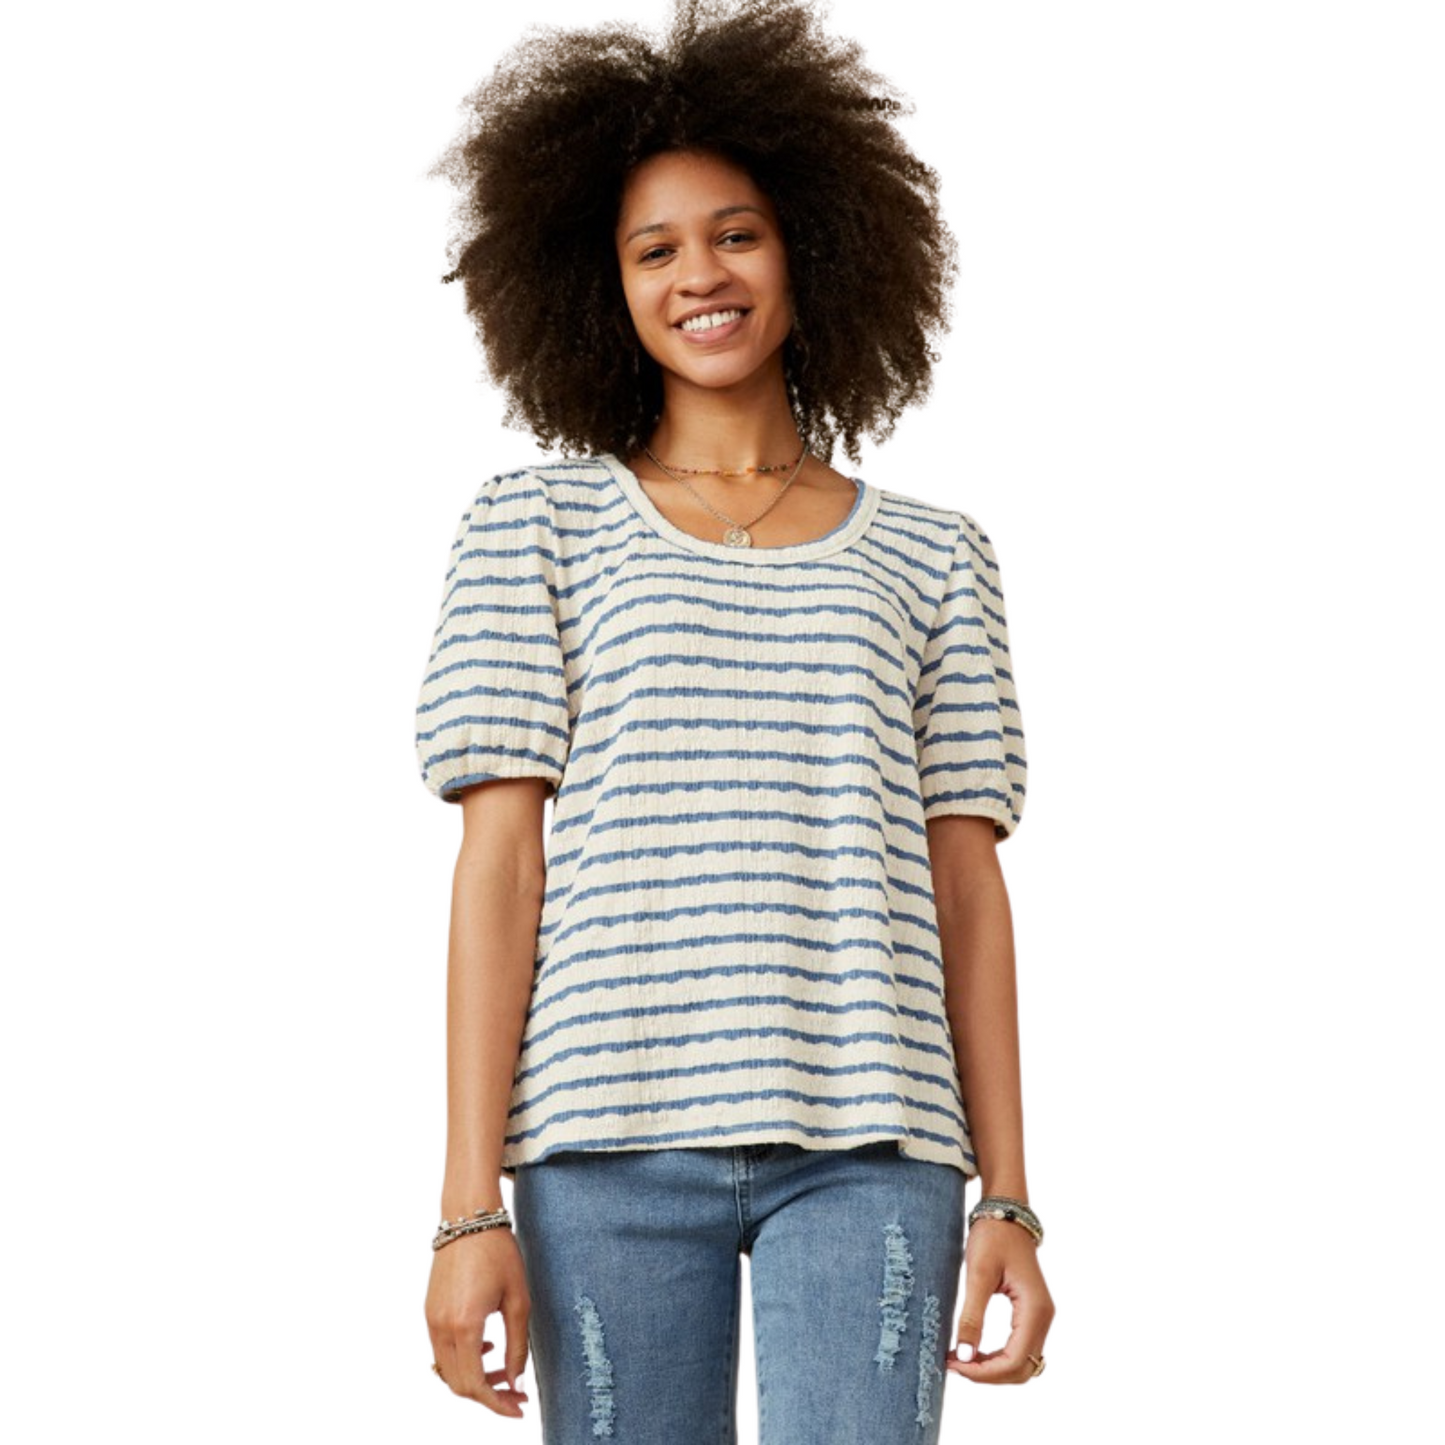 This statement knit top has a chic and modern feel. Crafted from a textured knit, this scoop neck top features a classic blue and white striped pattern. This timeless design is a wardrobe staple perfect for any occasion.